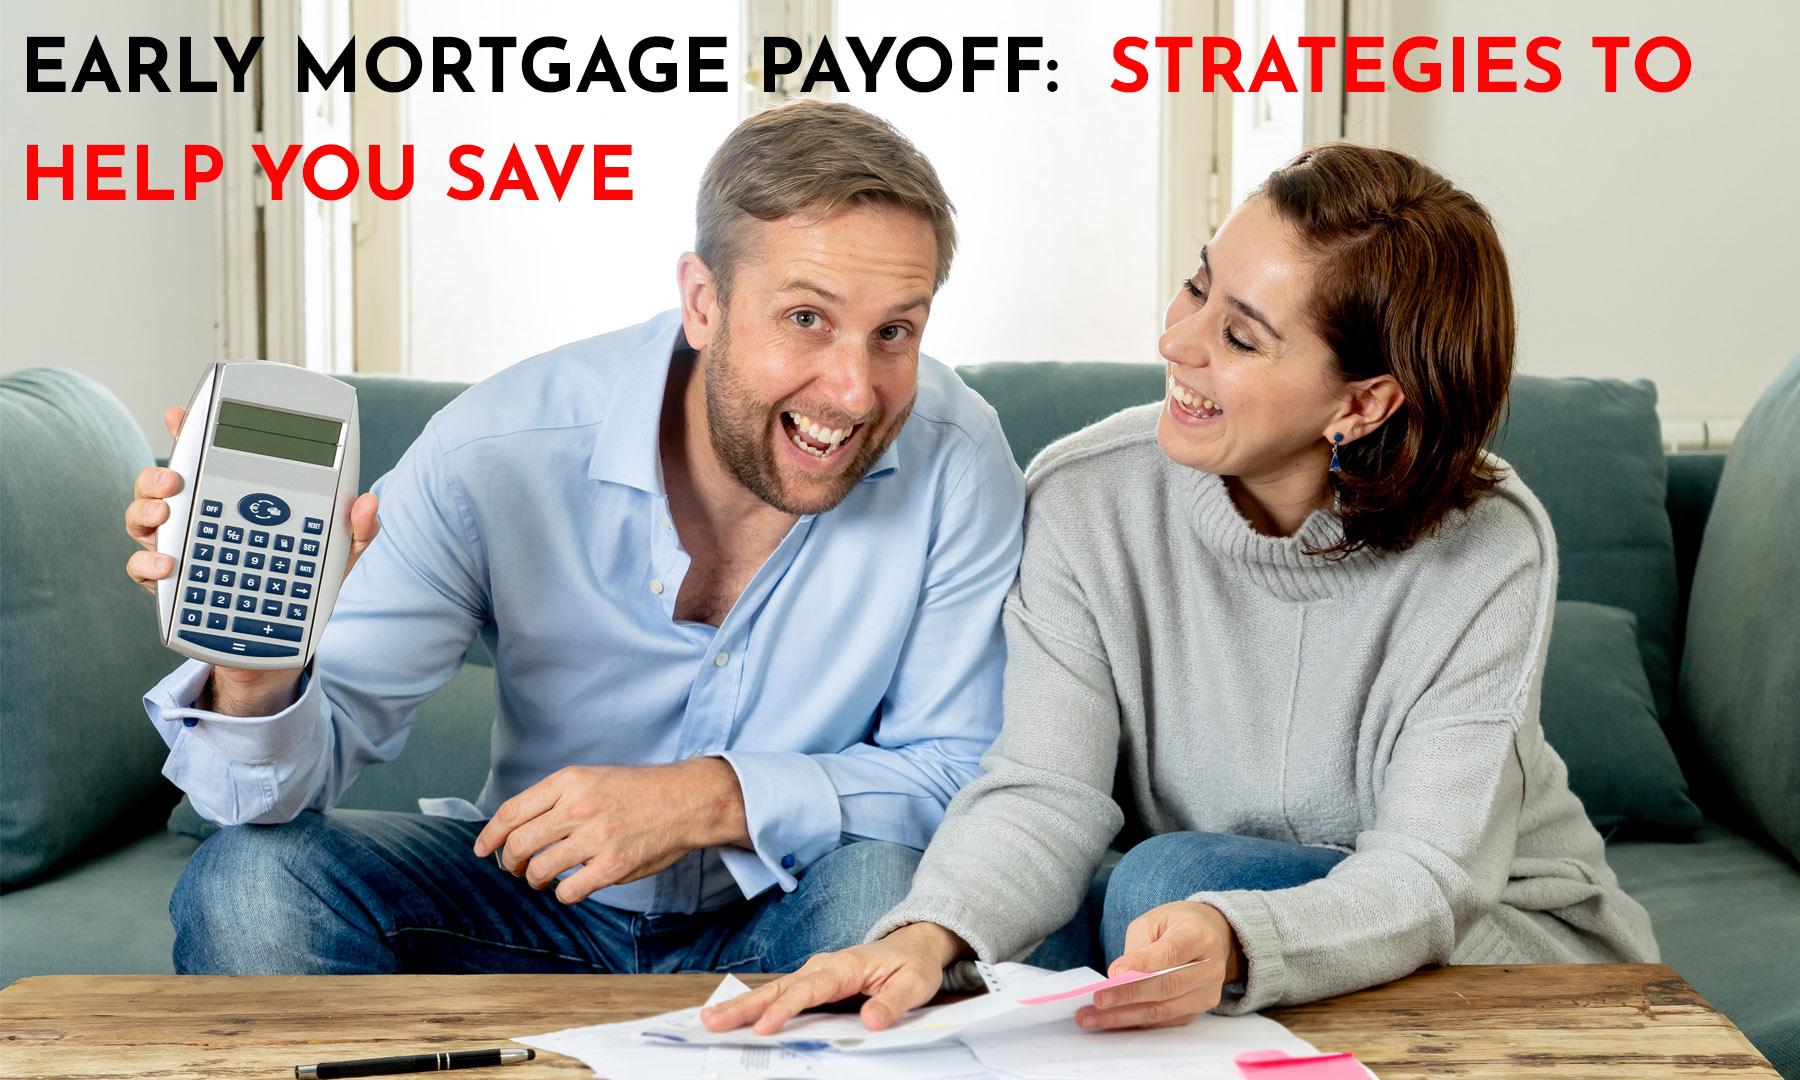 EARLY MORTGAGE PAYOFF : STRATEGIES TO HELP YOU SAVE